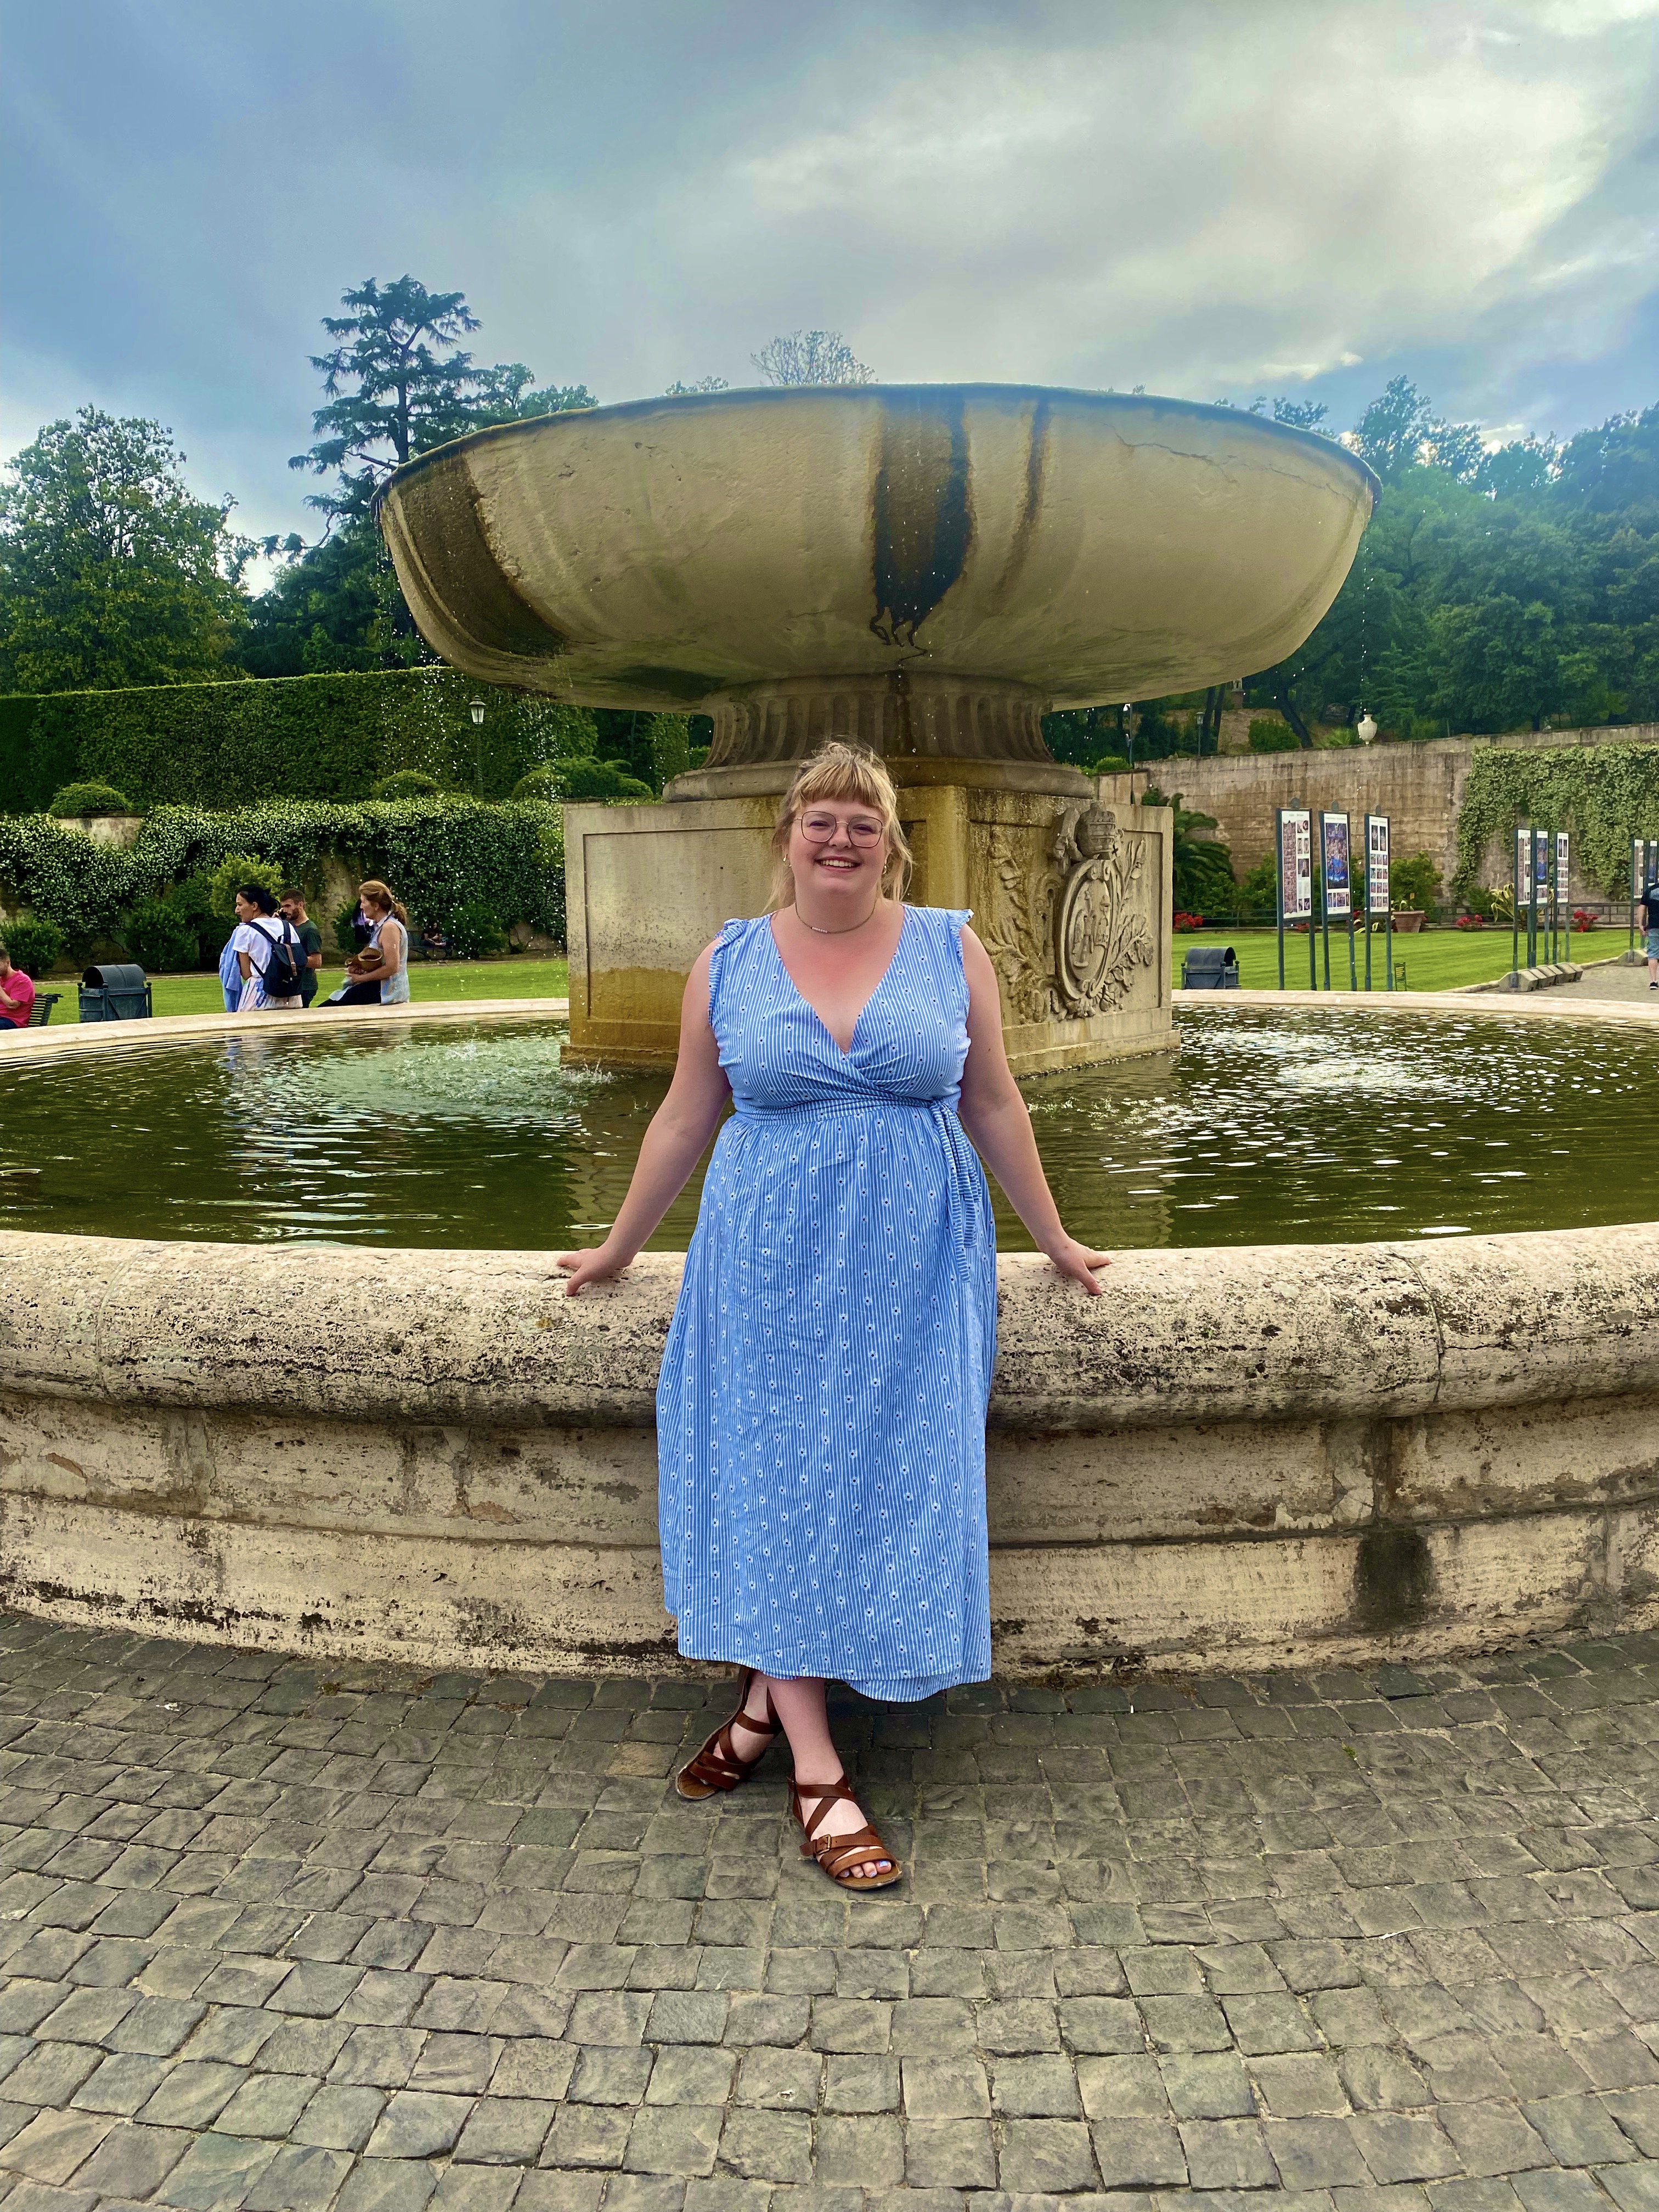 A woman in a blue dress posing in front of a fountain and smiling.